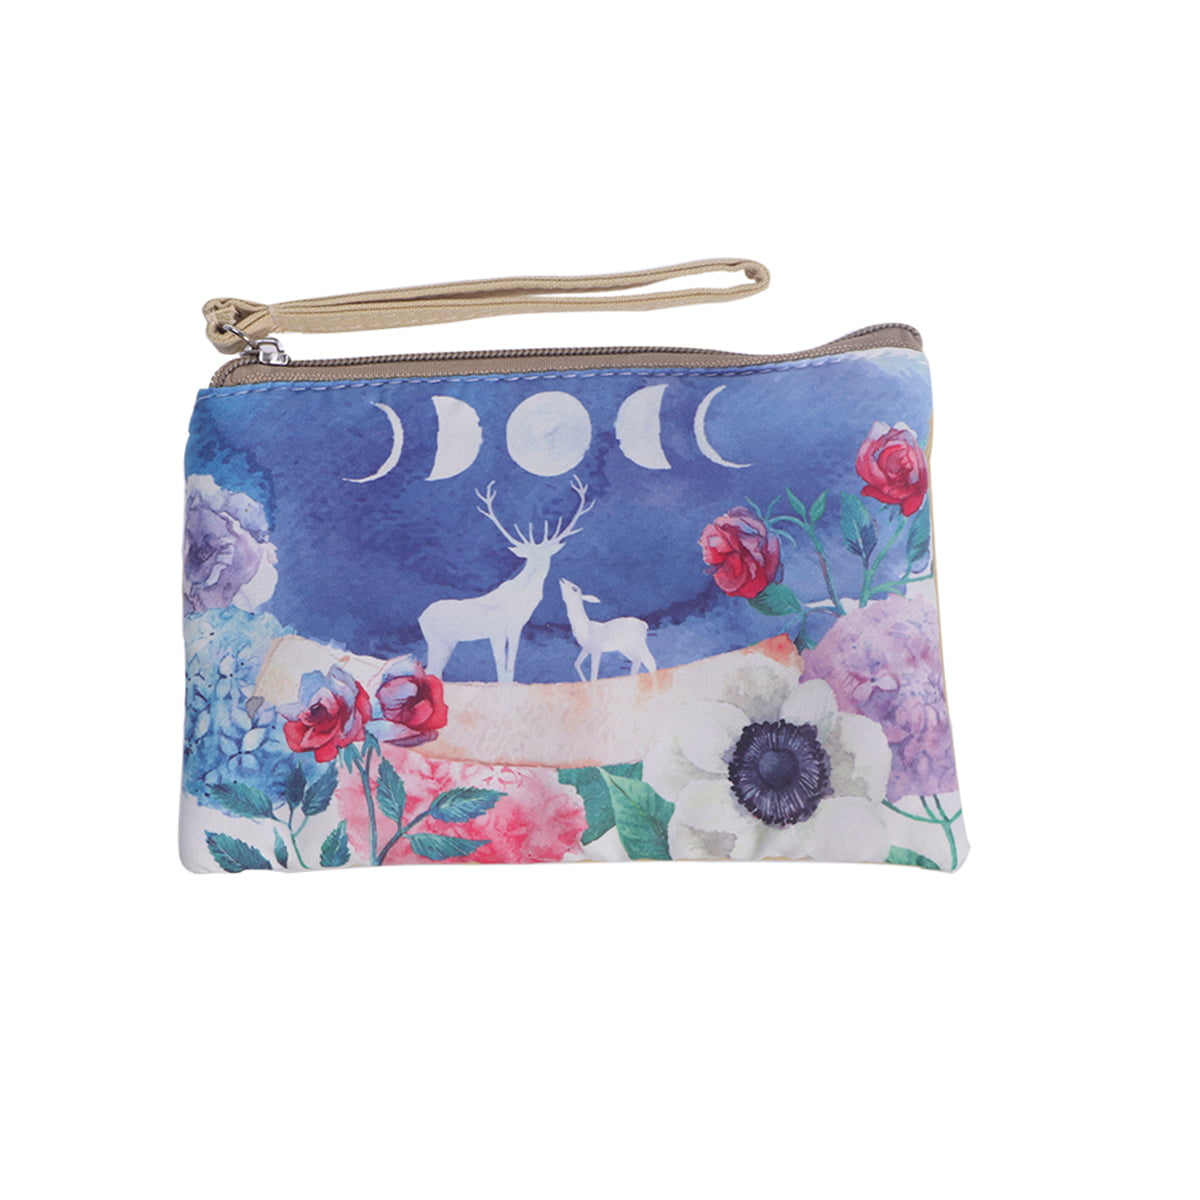 Womens Canvas Coin Purse Zipper Small Purse Wallets Cellphone Clutch Purse With Wrist Strap Baby With Elephant Pattern